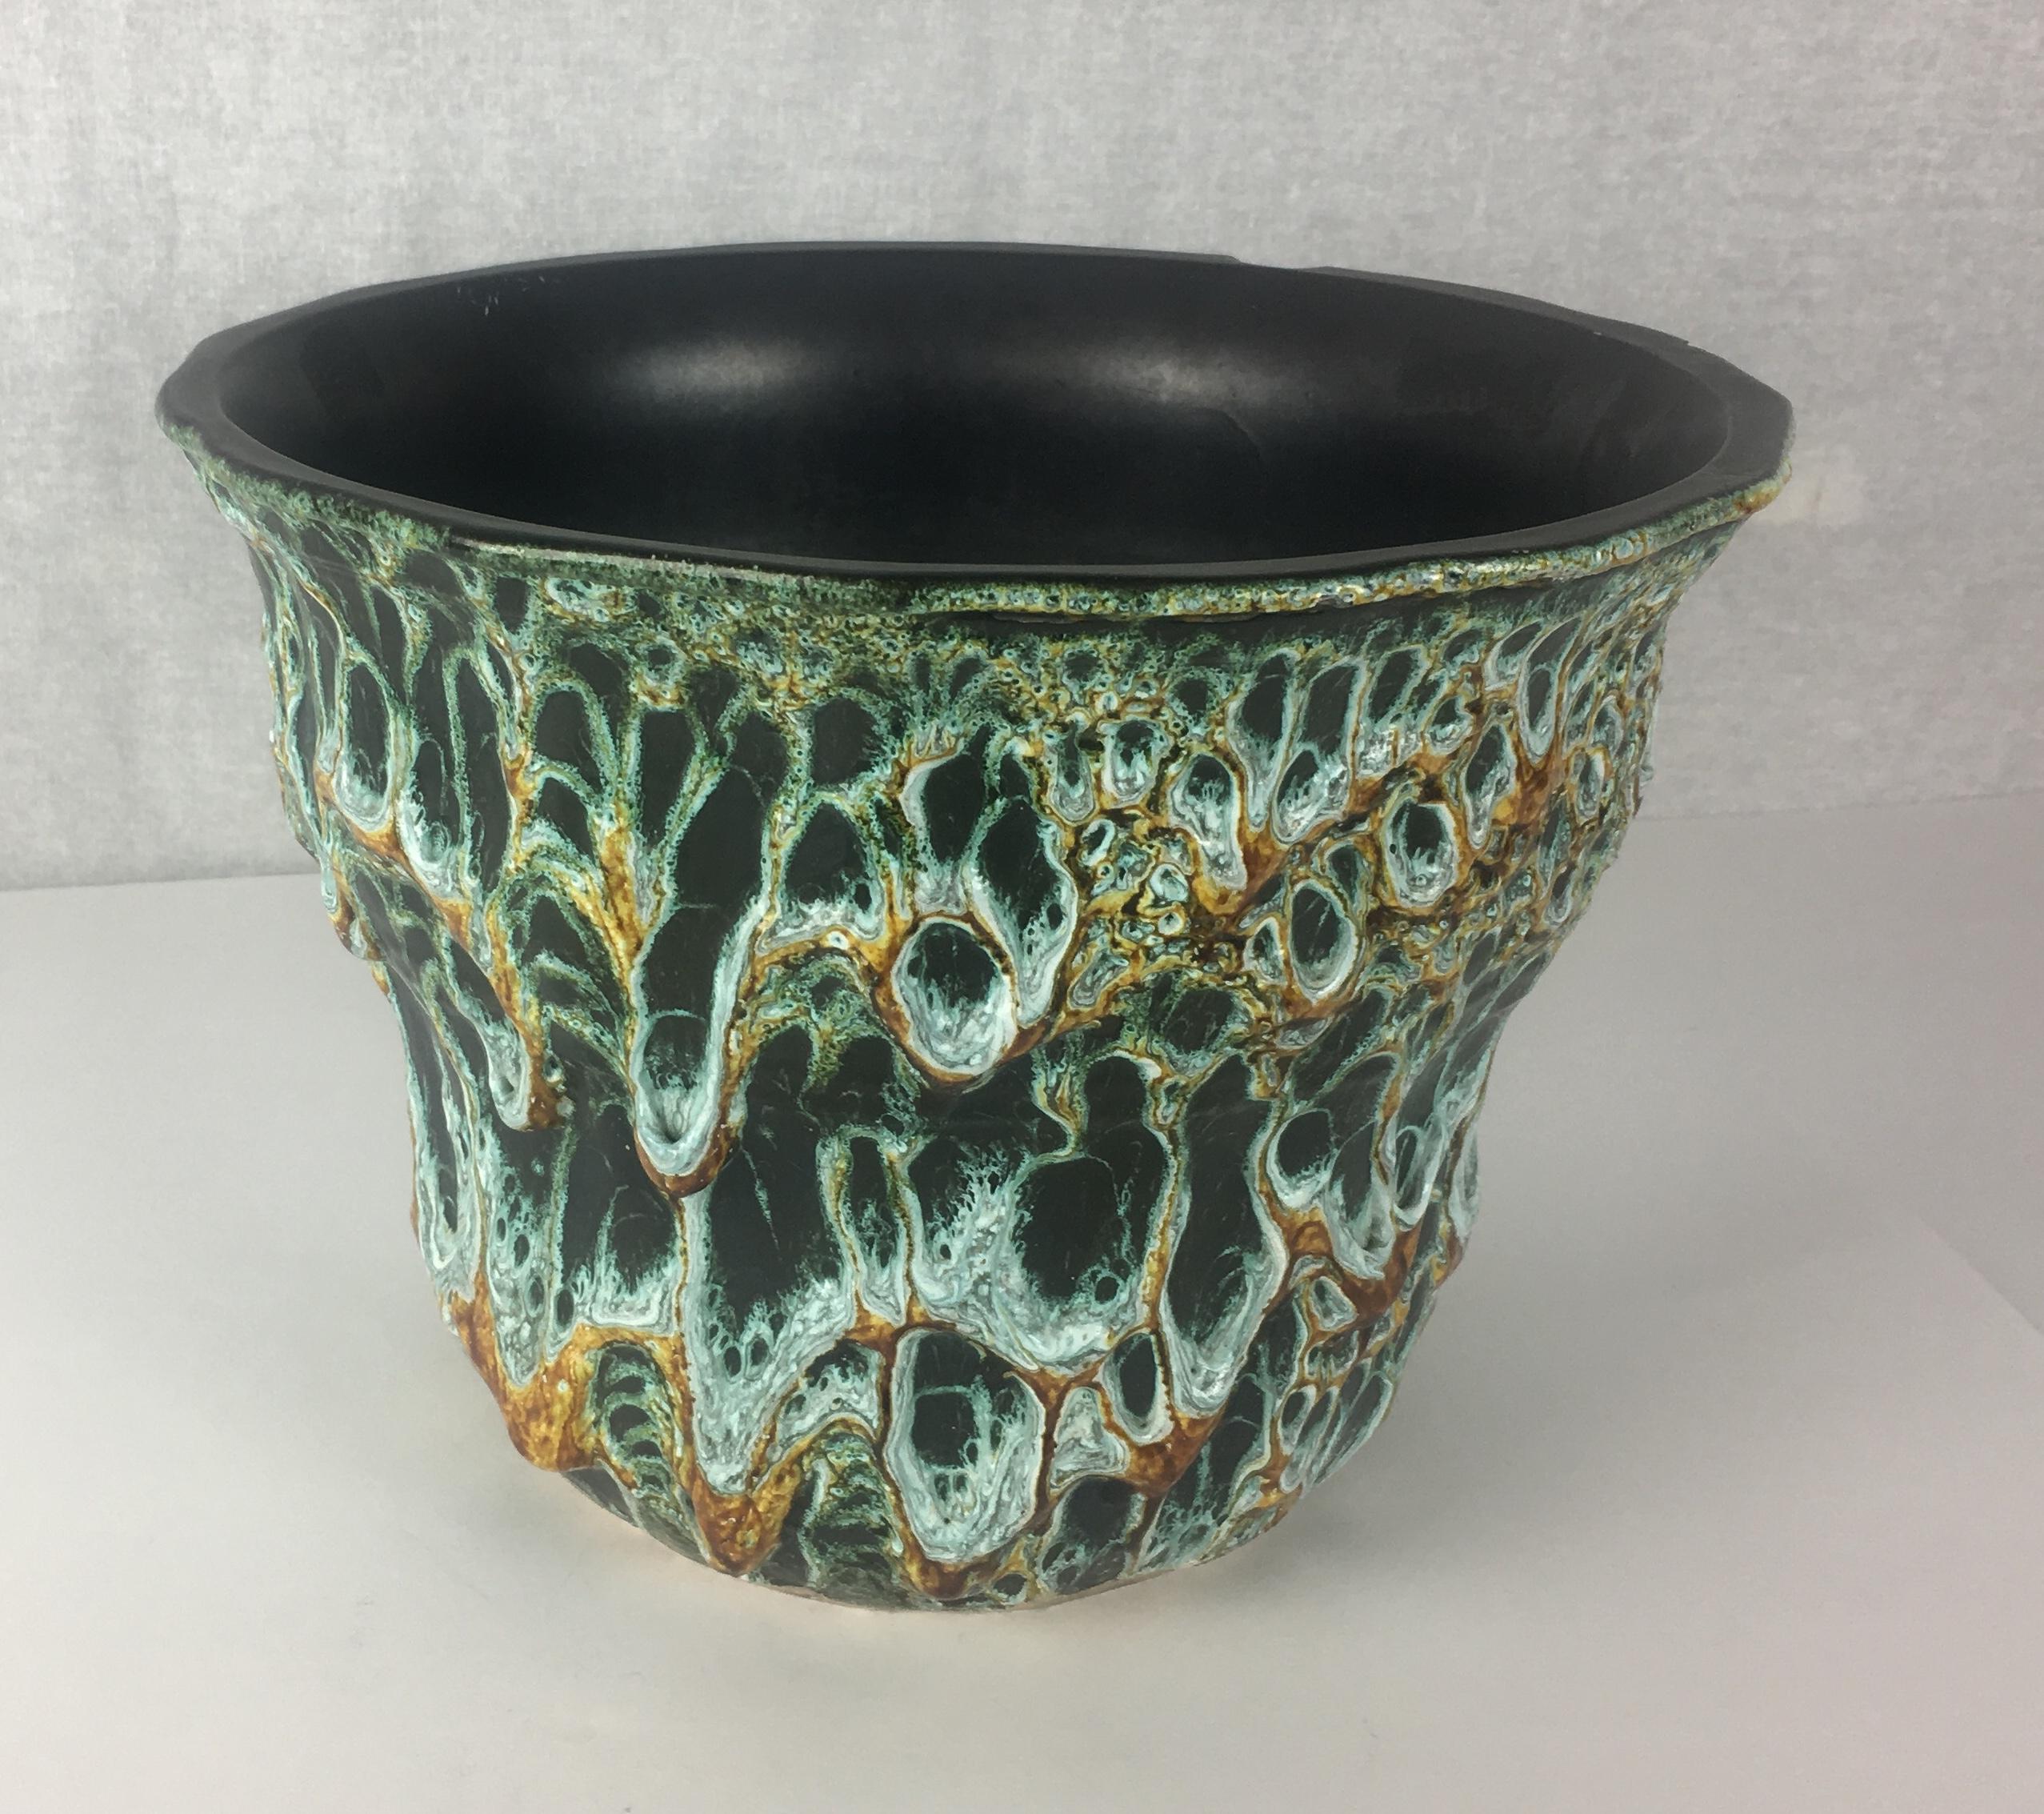 A stunning Fat Lava Studio planter by Charles Cart, circa 1960. 
The distinctive glaze on this planter that was developed by Charles Cart the founder of the Le Cyclope Pottery brand in Annecy-le-Vieux in the Haute Savoie area of France. The firing